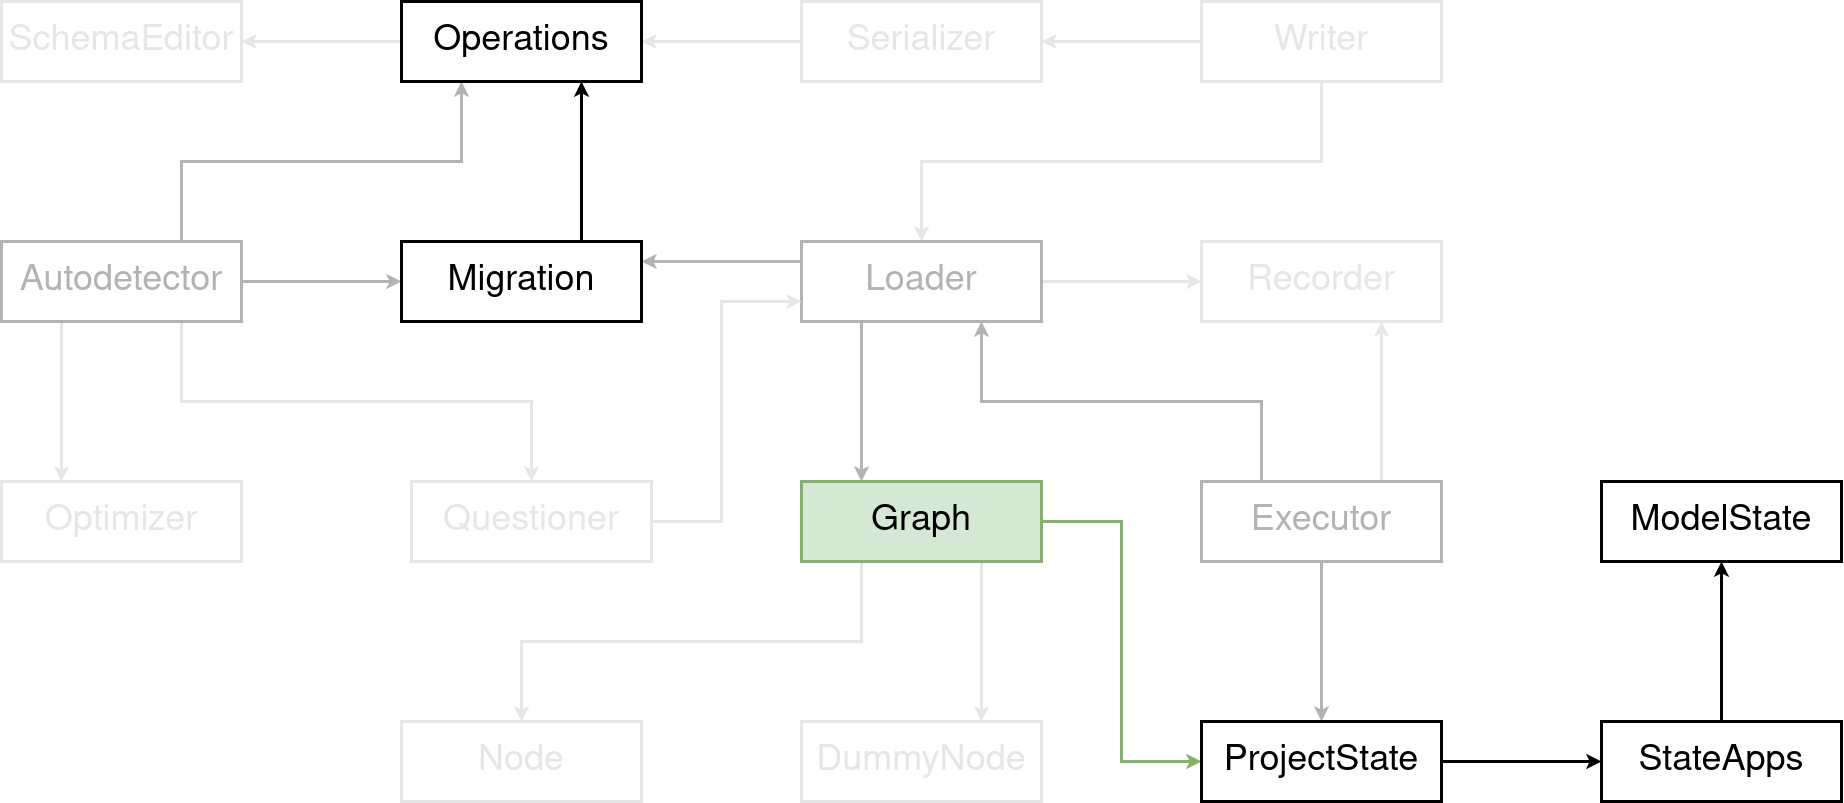 Highlighted the graph component in the diagram